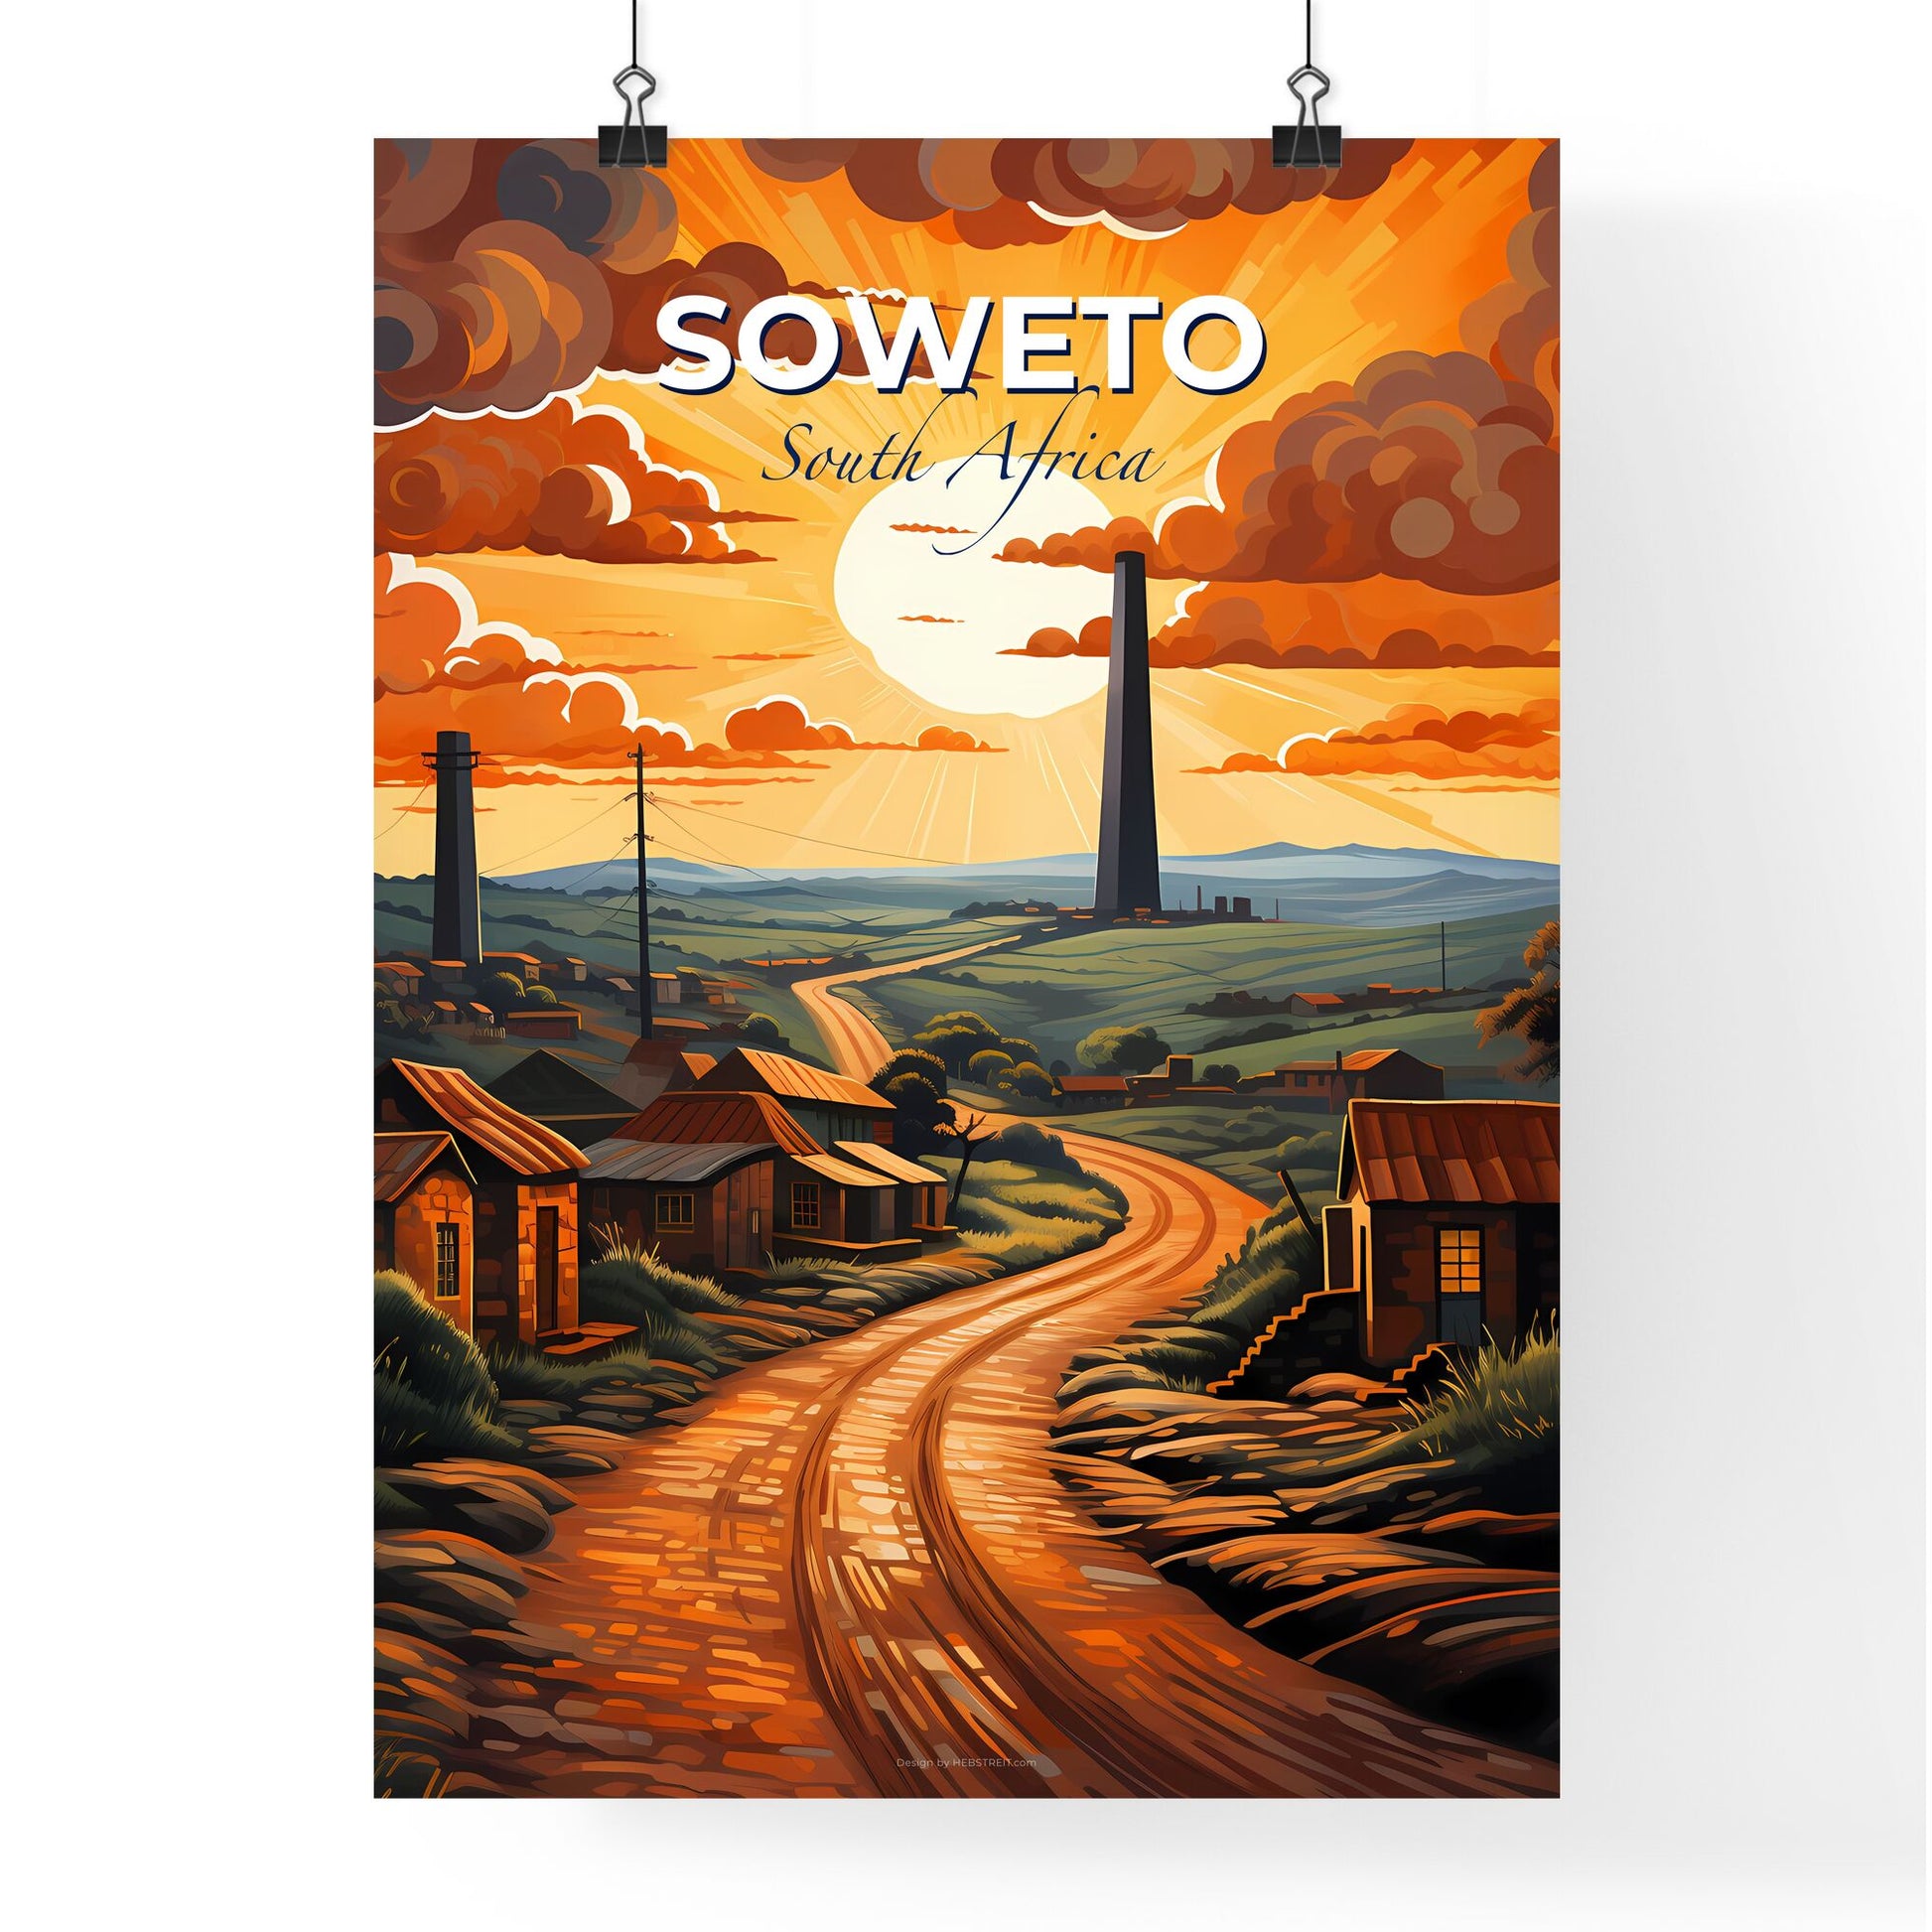 Soweto Cityscape: Vibrant Village Artwork Depicting a Road Leading to a Settlement in South Africa Default Title